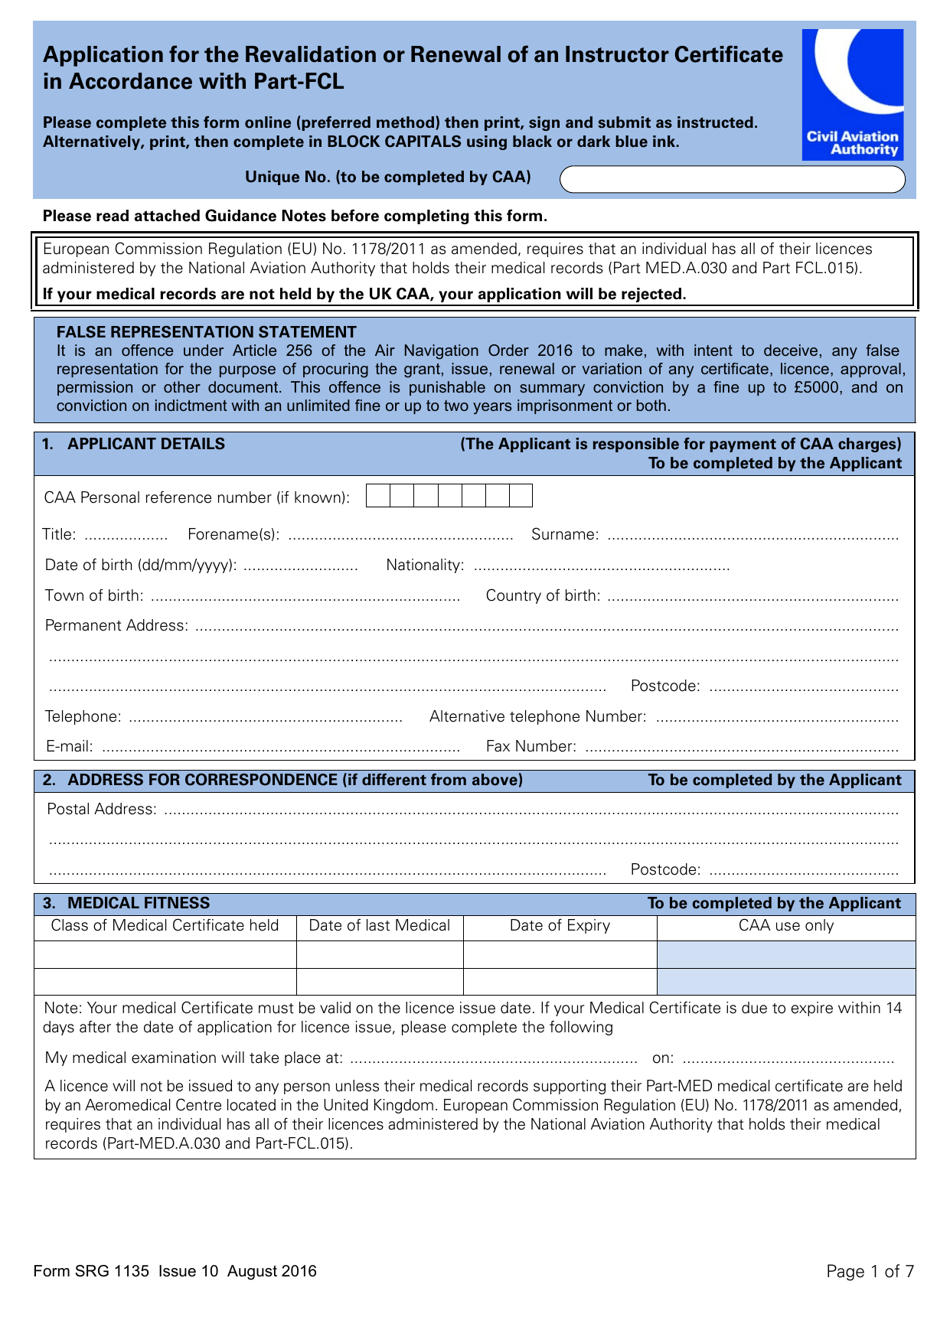 Form SRG1135 Application for the Revalidation or Renewal of an Instructor Certificate in Accordance With Part-Fcl - United Kingdom, Page 1